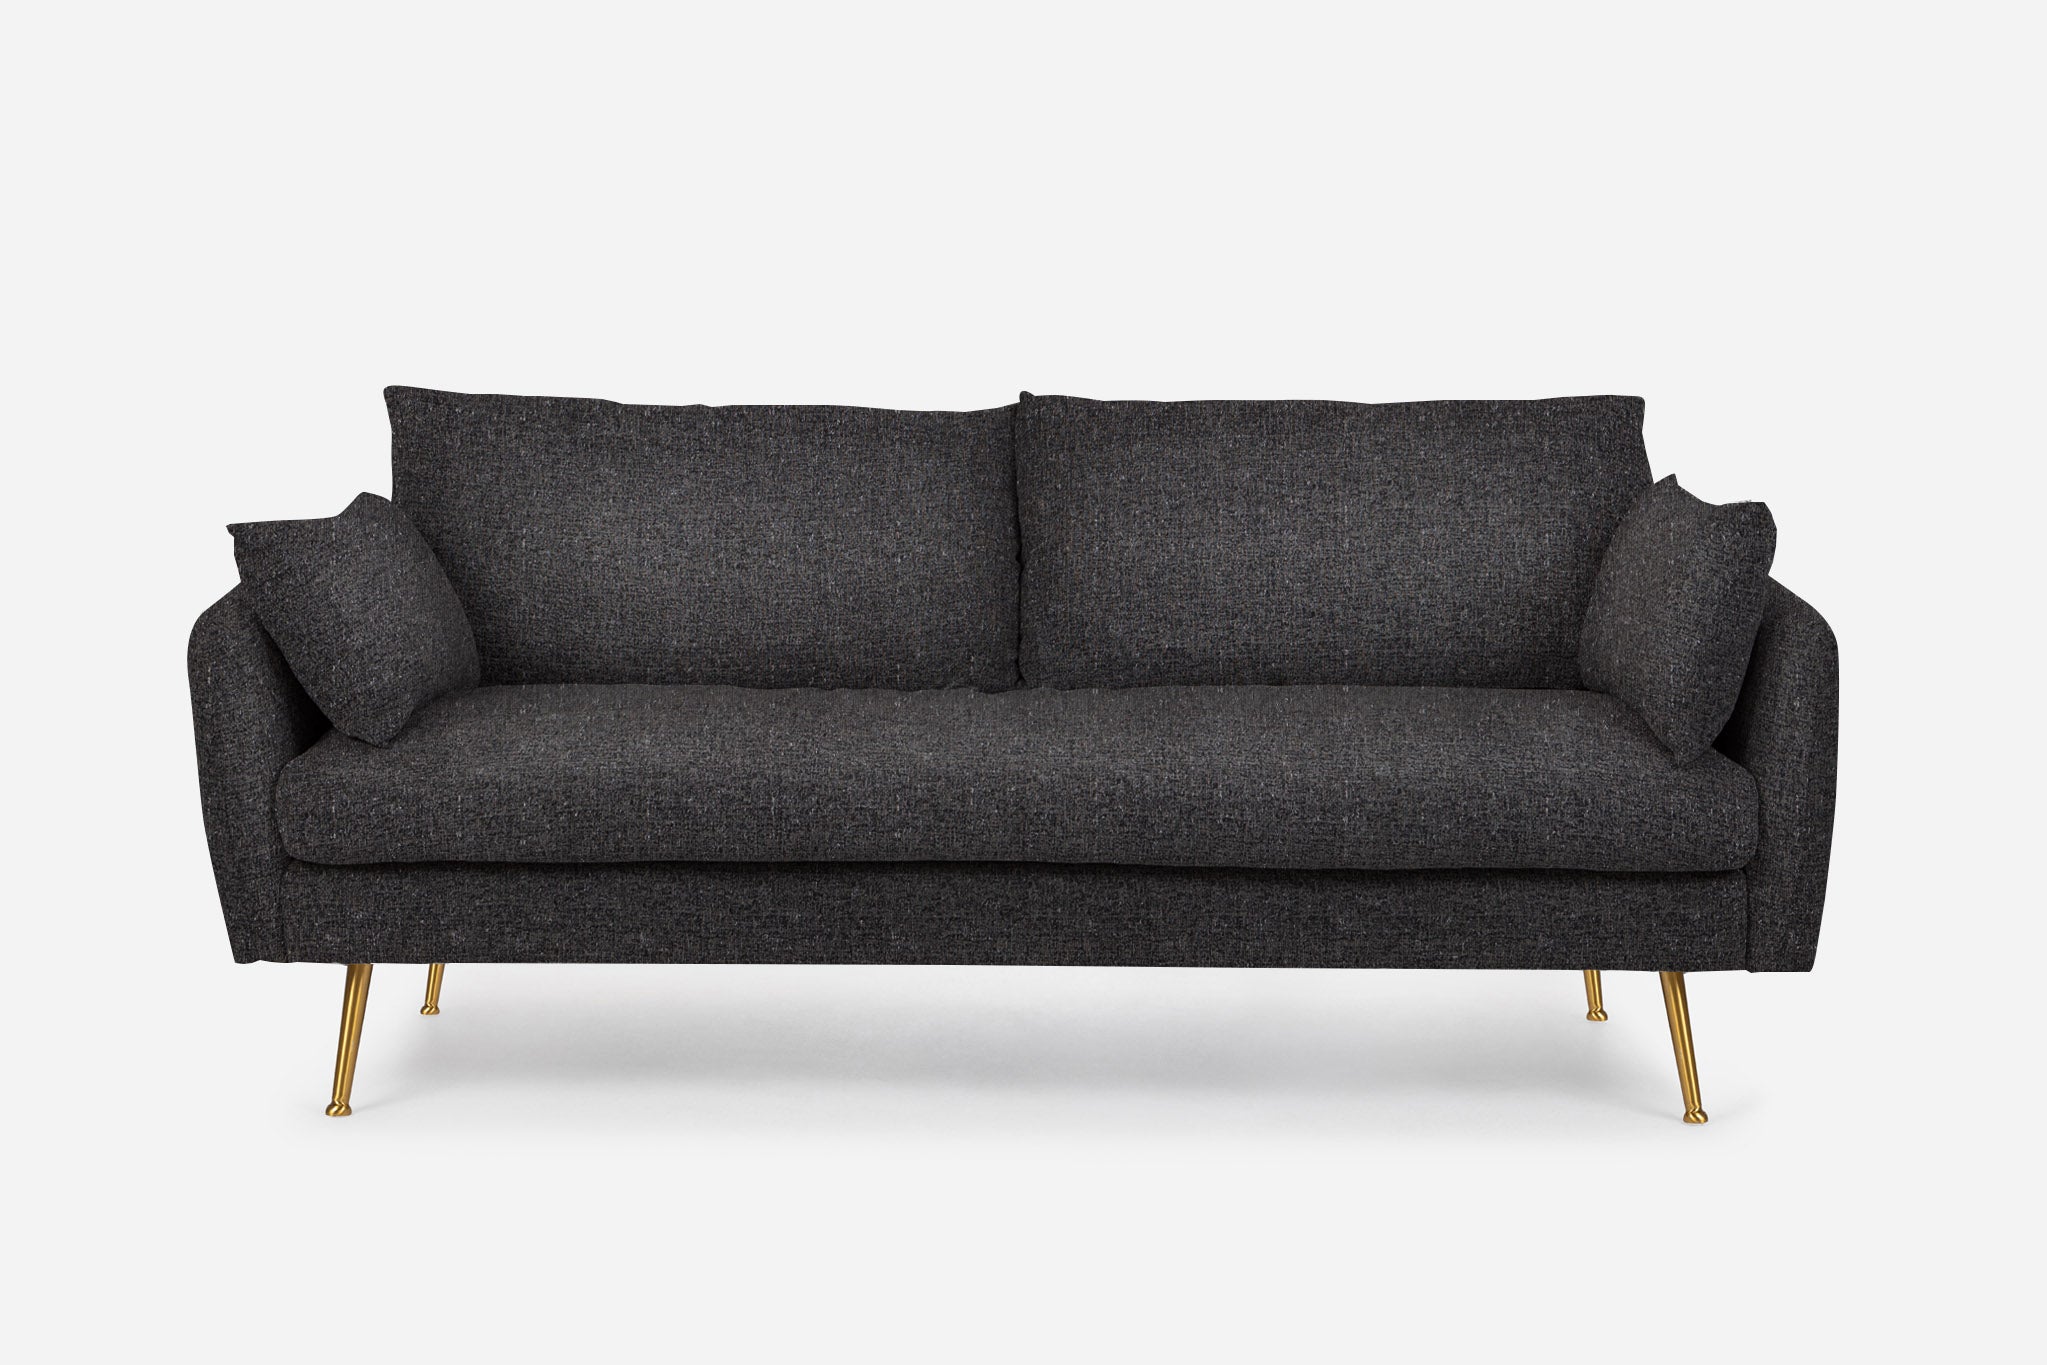 park sofa shown in charcoal with gold legs